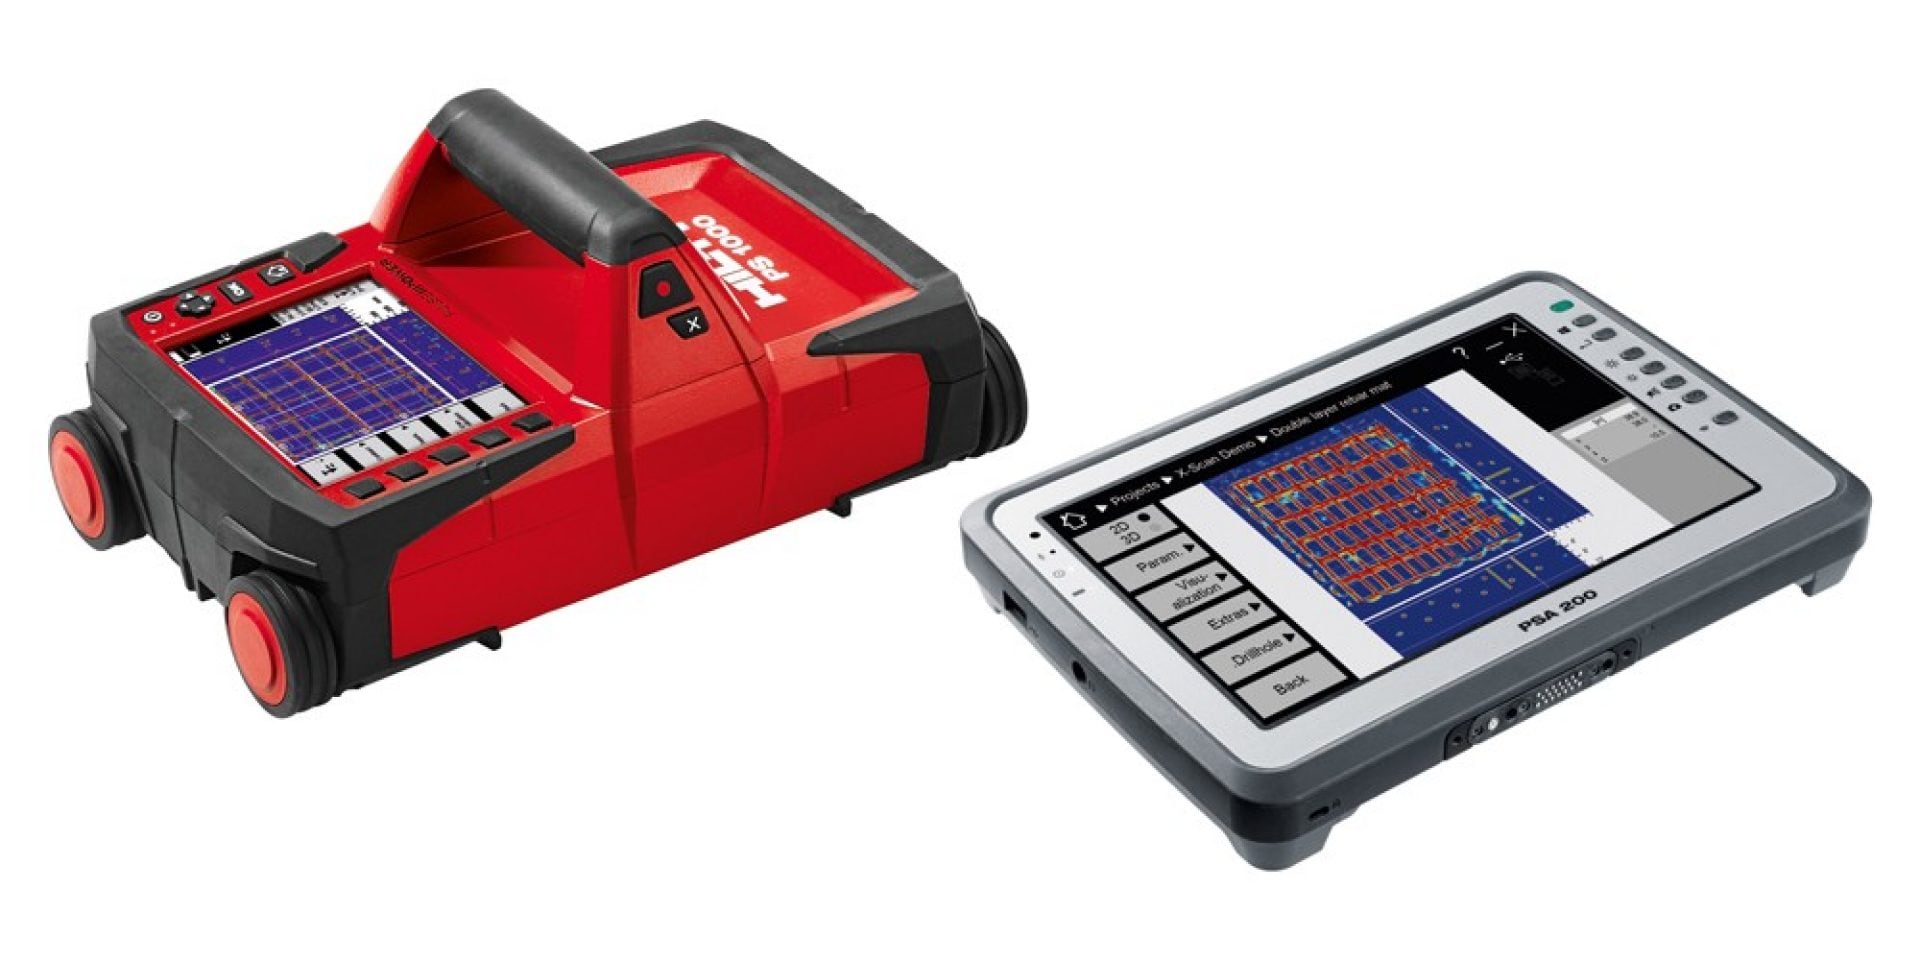 Hilti PS 1000 X-Scan detection system and PSA 200 Tablet